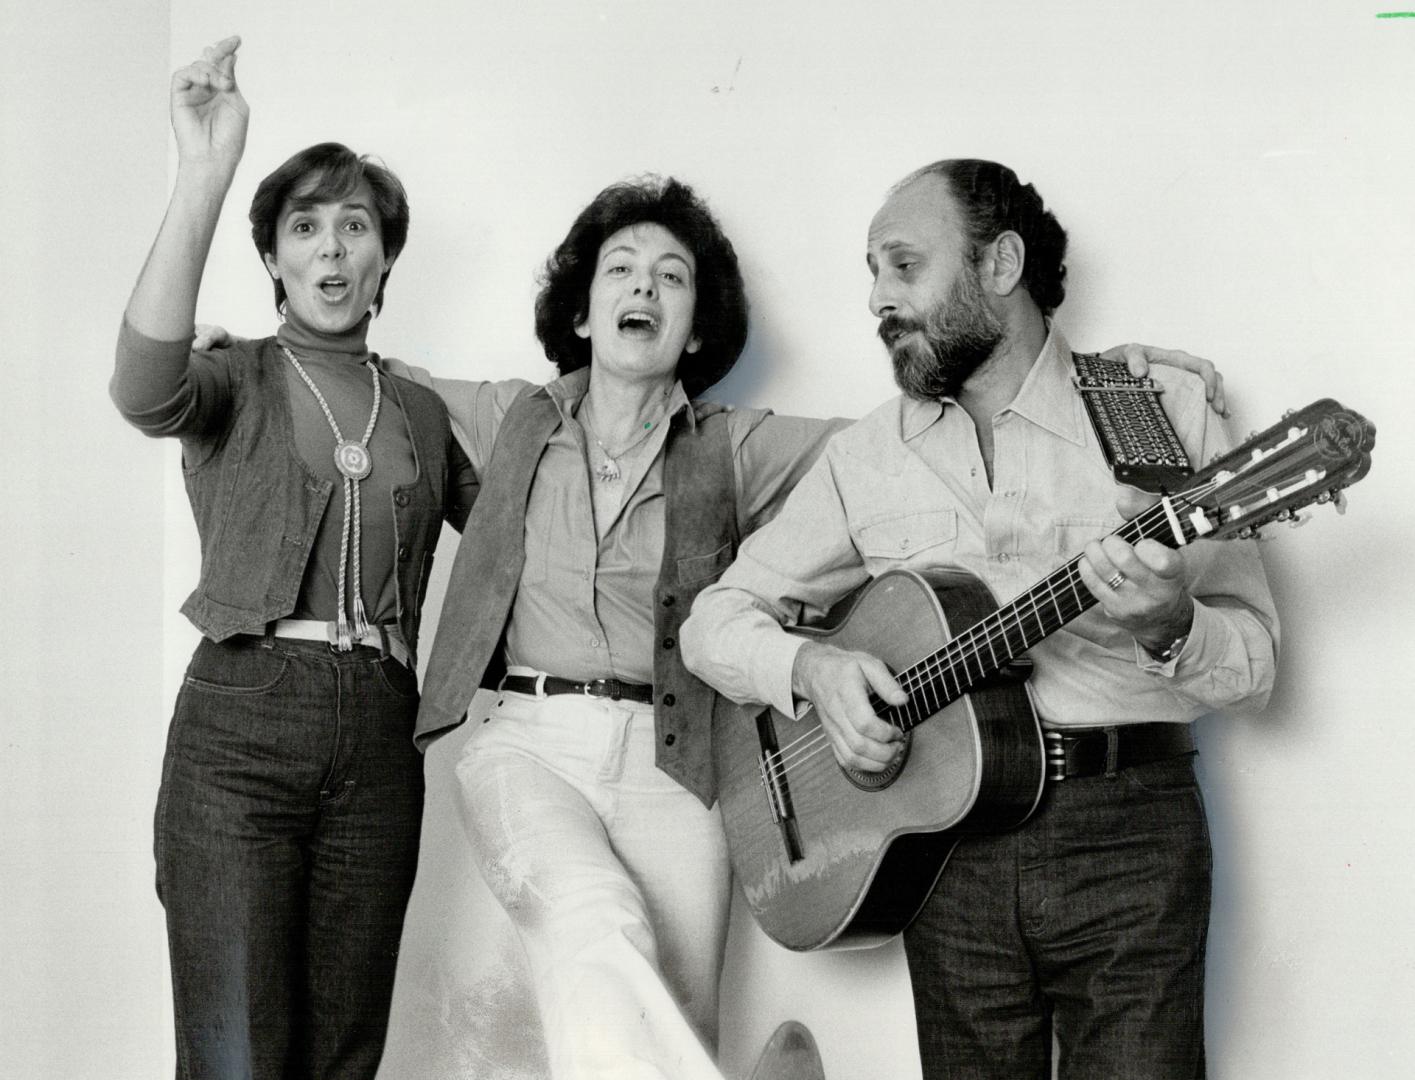 Sharon, Lois and Bram have a hard time fitting in all their favorites for youngsters on record, they say